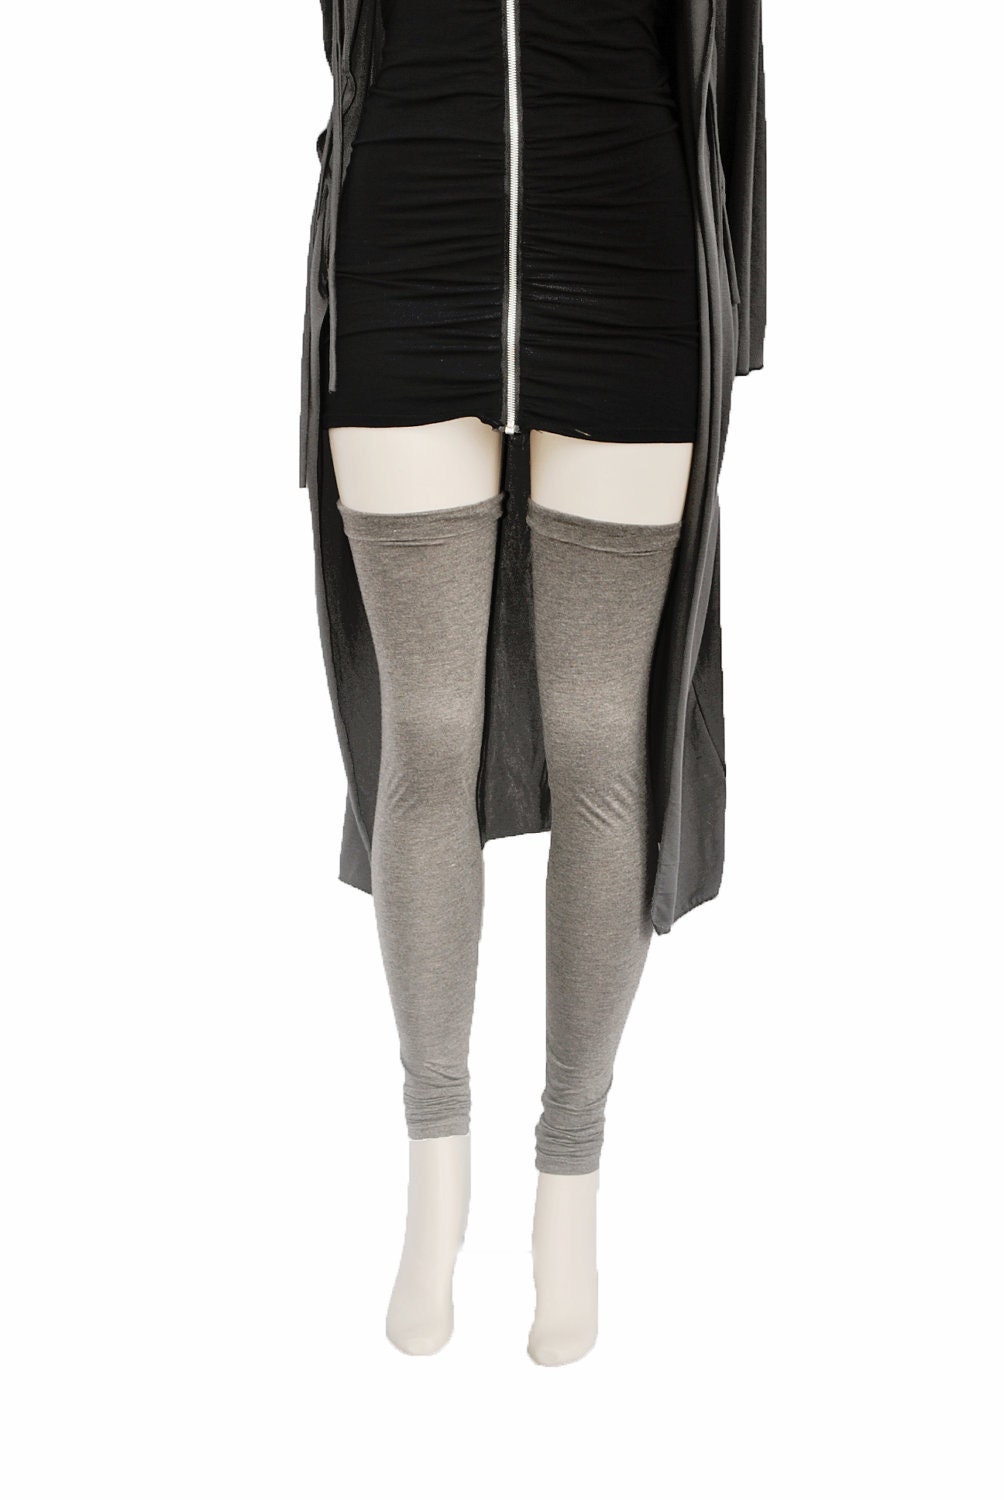 Thigh High Leg Warmers Heather Charcoal Womens Spring Cuffed and Ruched - FineThreadz